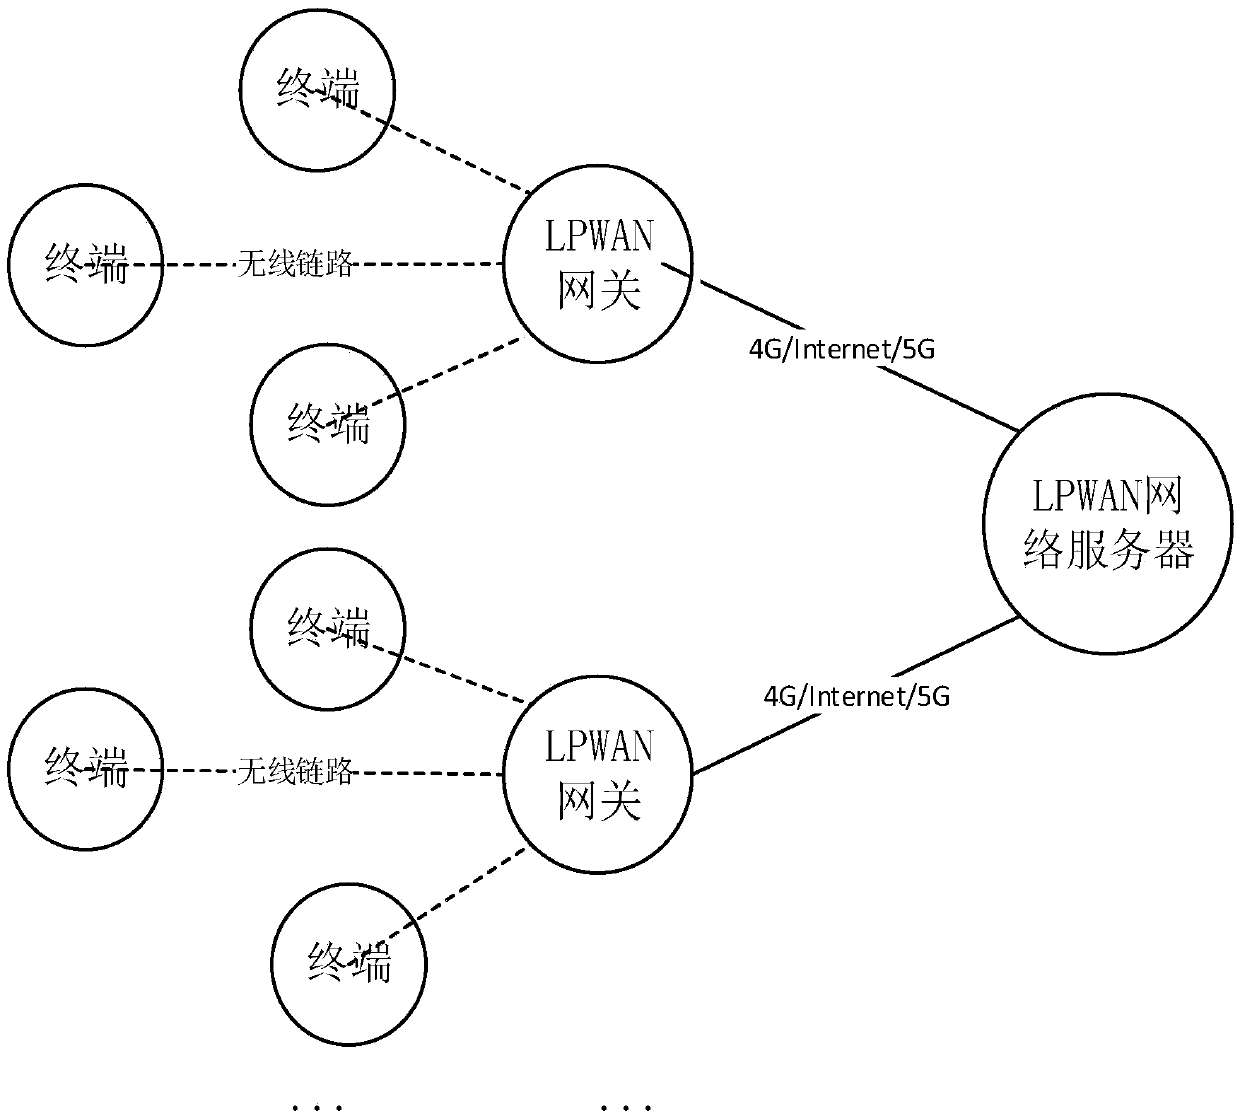 Low-power wide area network planning method based on data mining